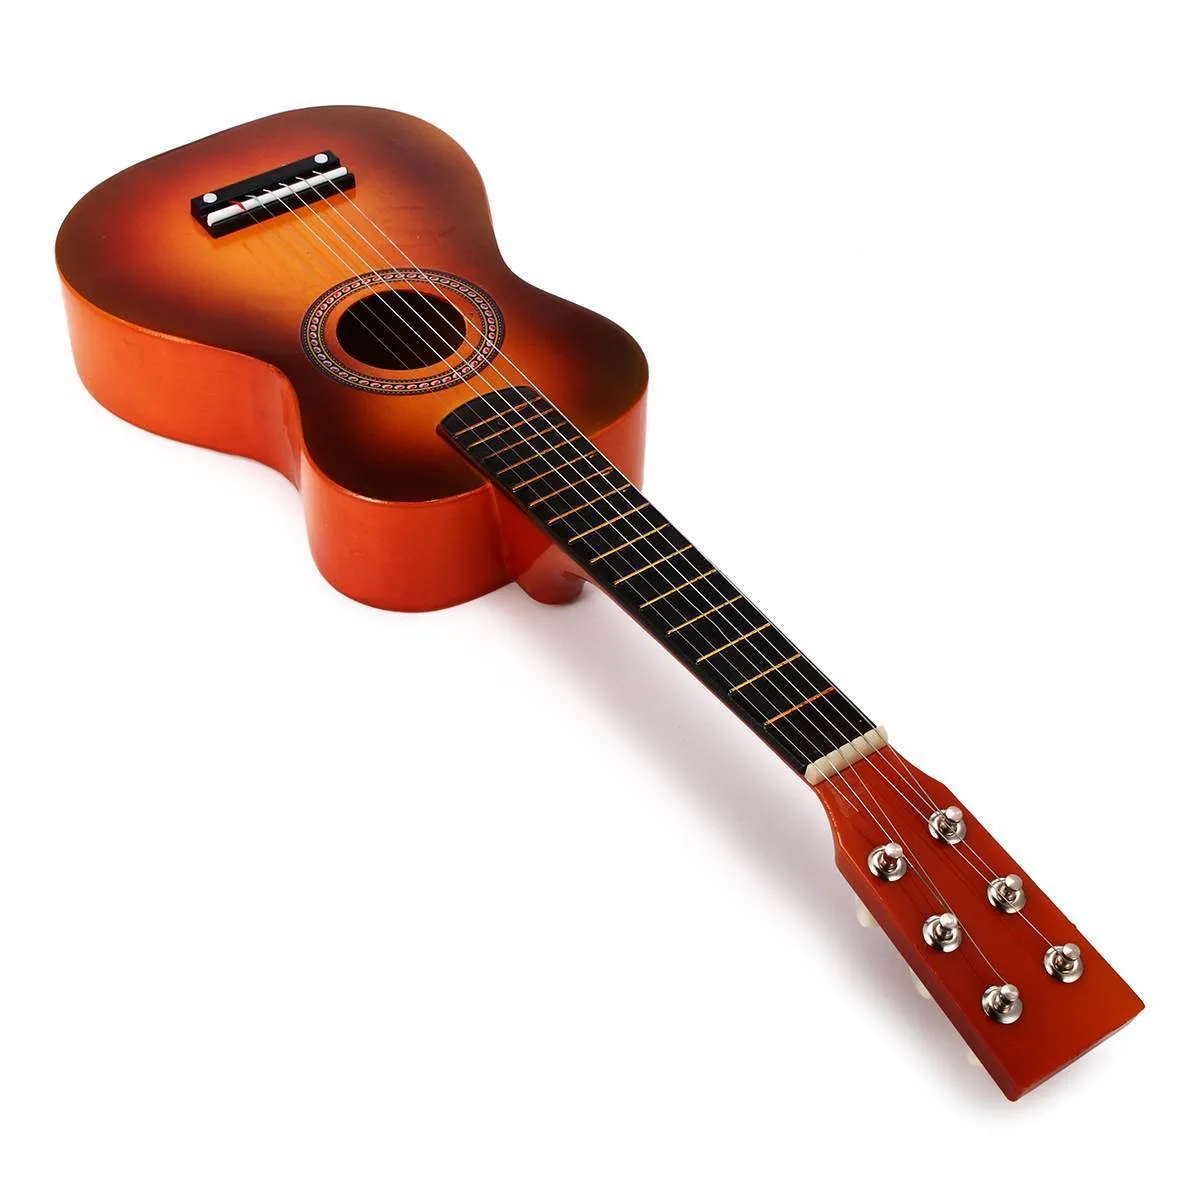 6 Strings Children Wooden Acoustic Guitar Musical Instrument Toy Early Educational Learning Toys Kids Toy Gifts 23 235u